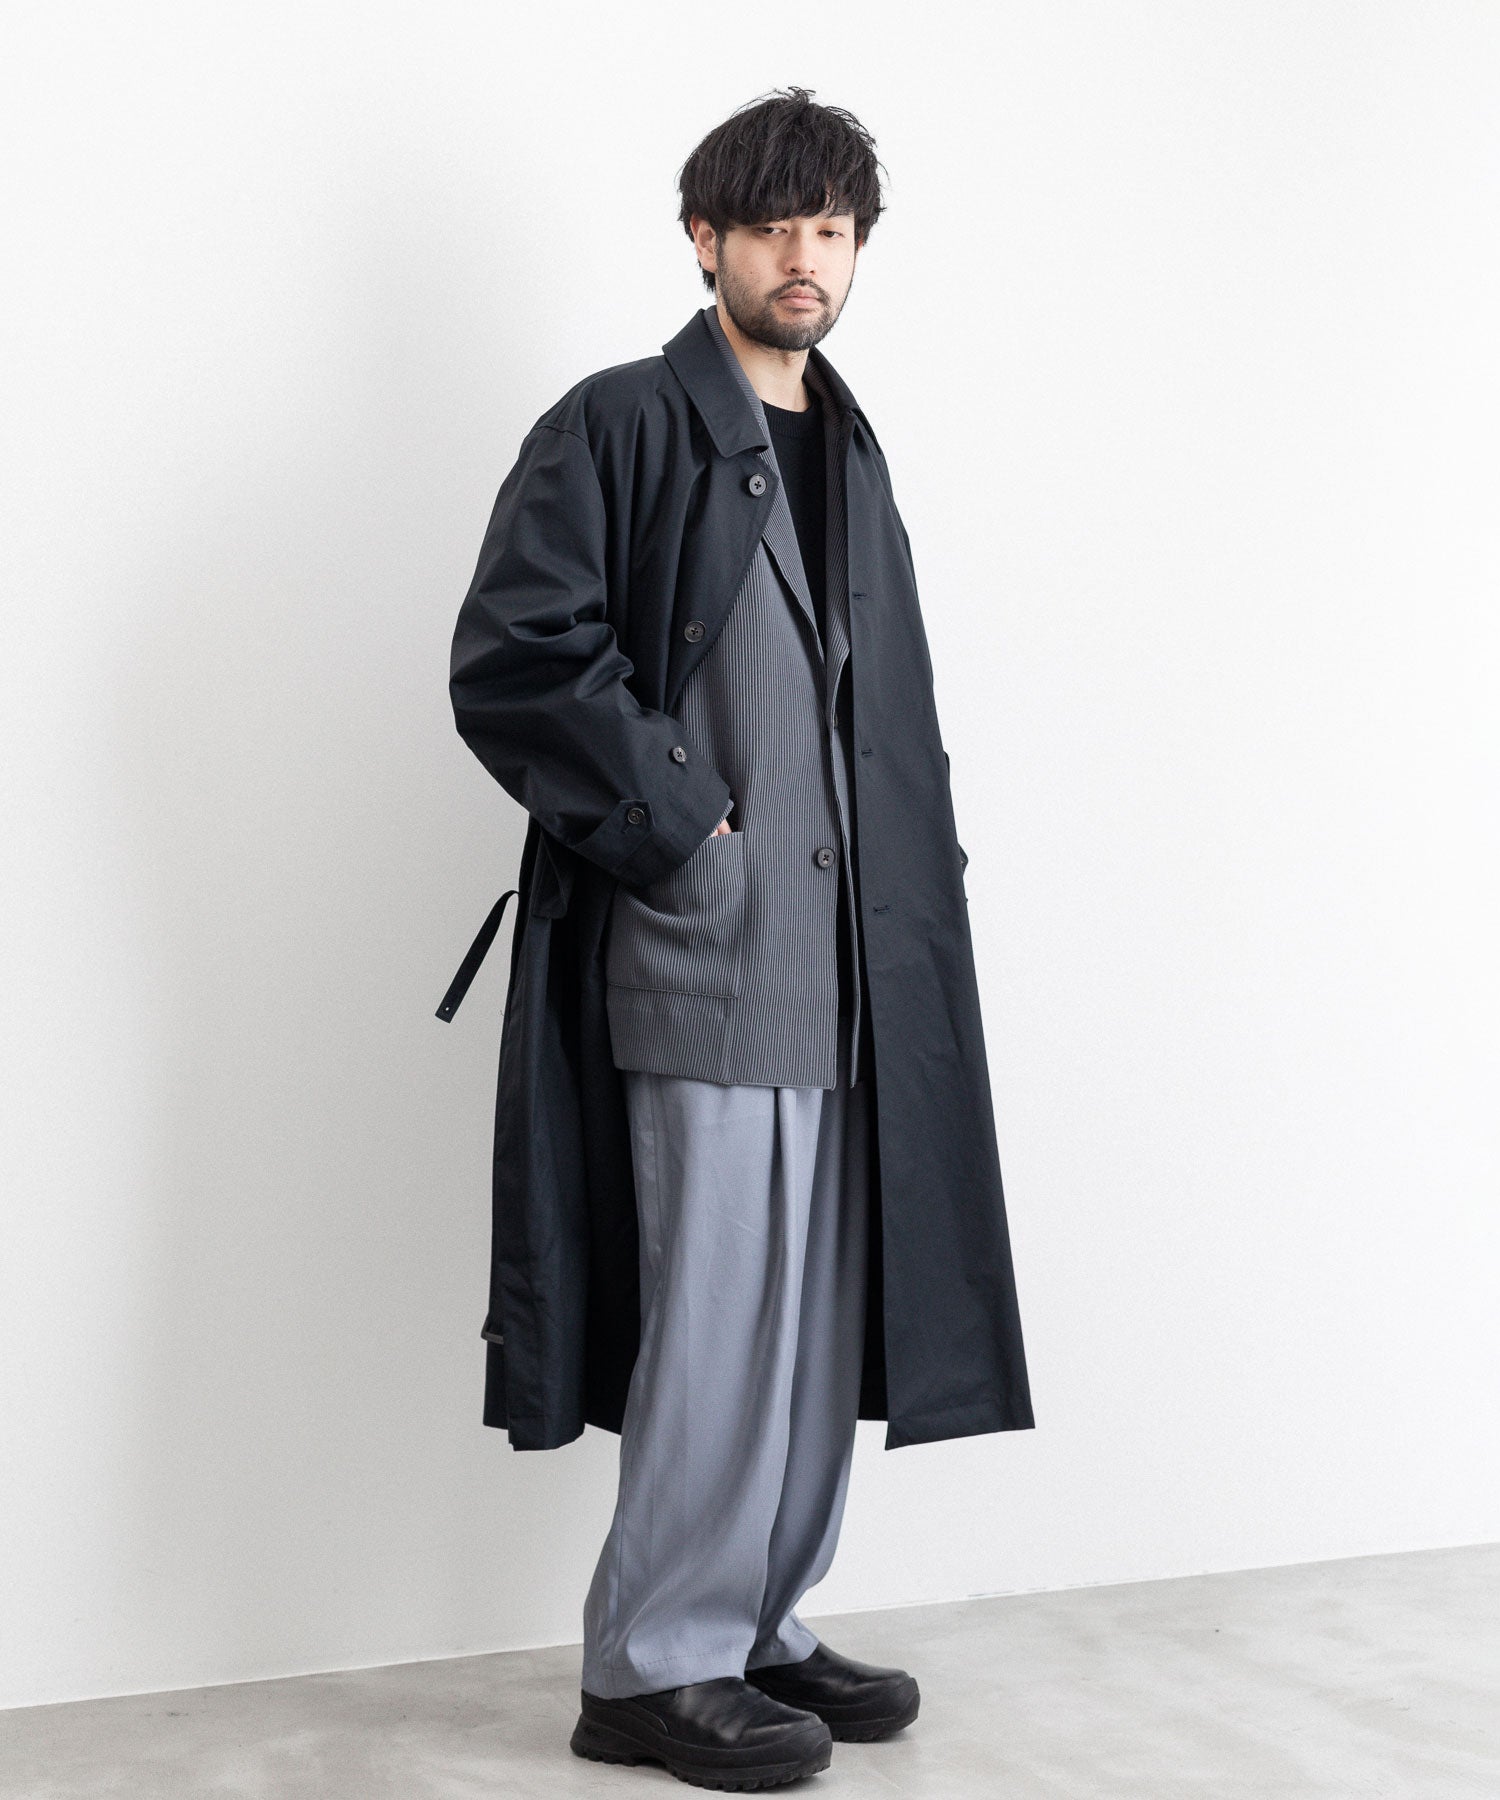 【stein】CUPRO WIDE EASY TROUSERS -  BLUE GREY シュタイン 23SS session セッション 福岡セレクトショップ 公式通販サイト